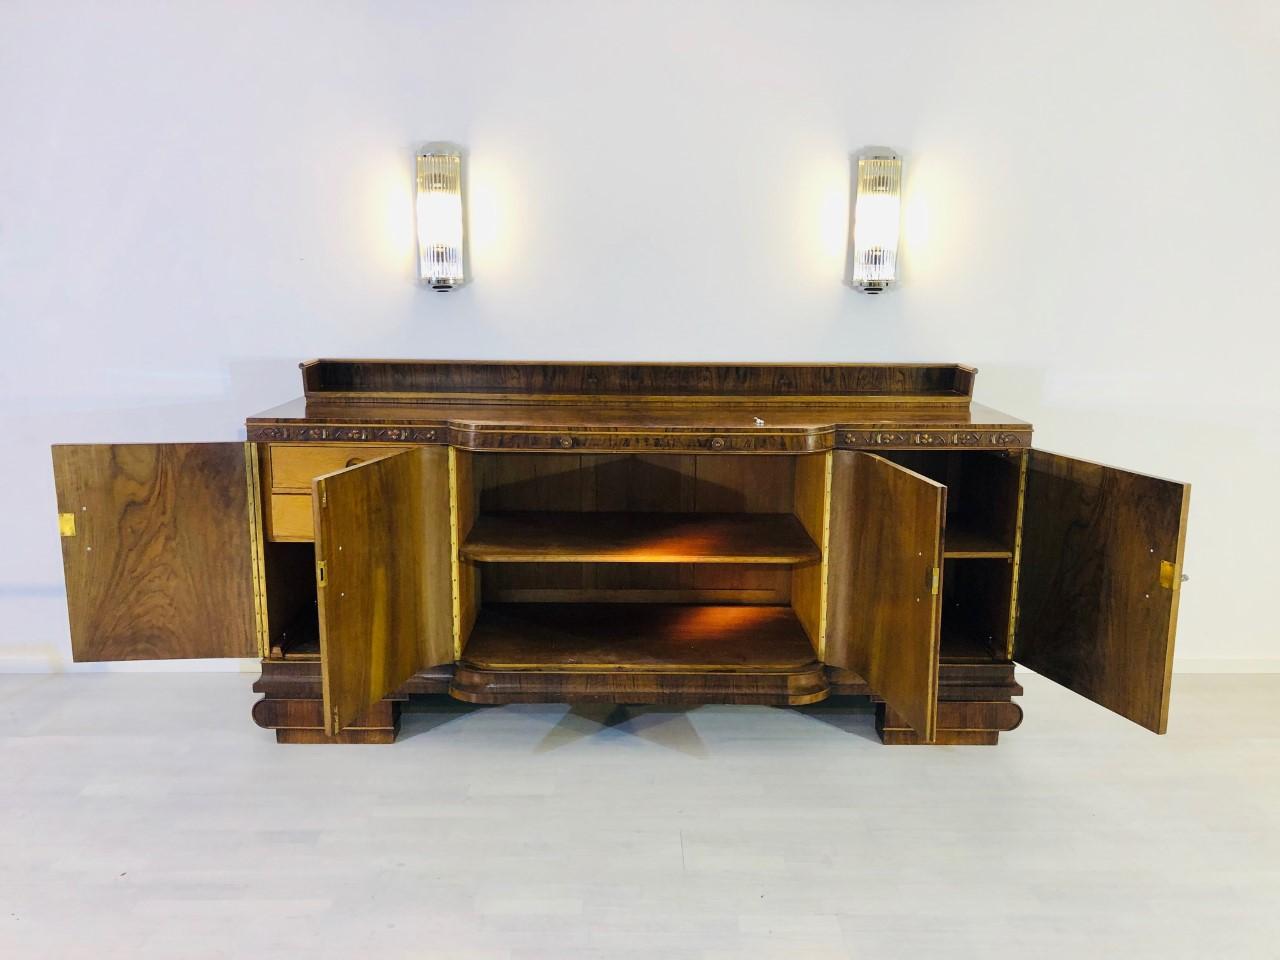 Early 20th Century Large Original Art Deco Sideboard made of Walnut with Cherry Ornamentation